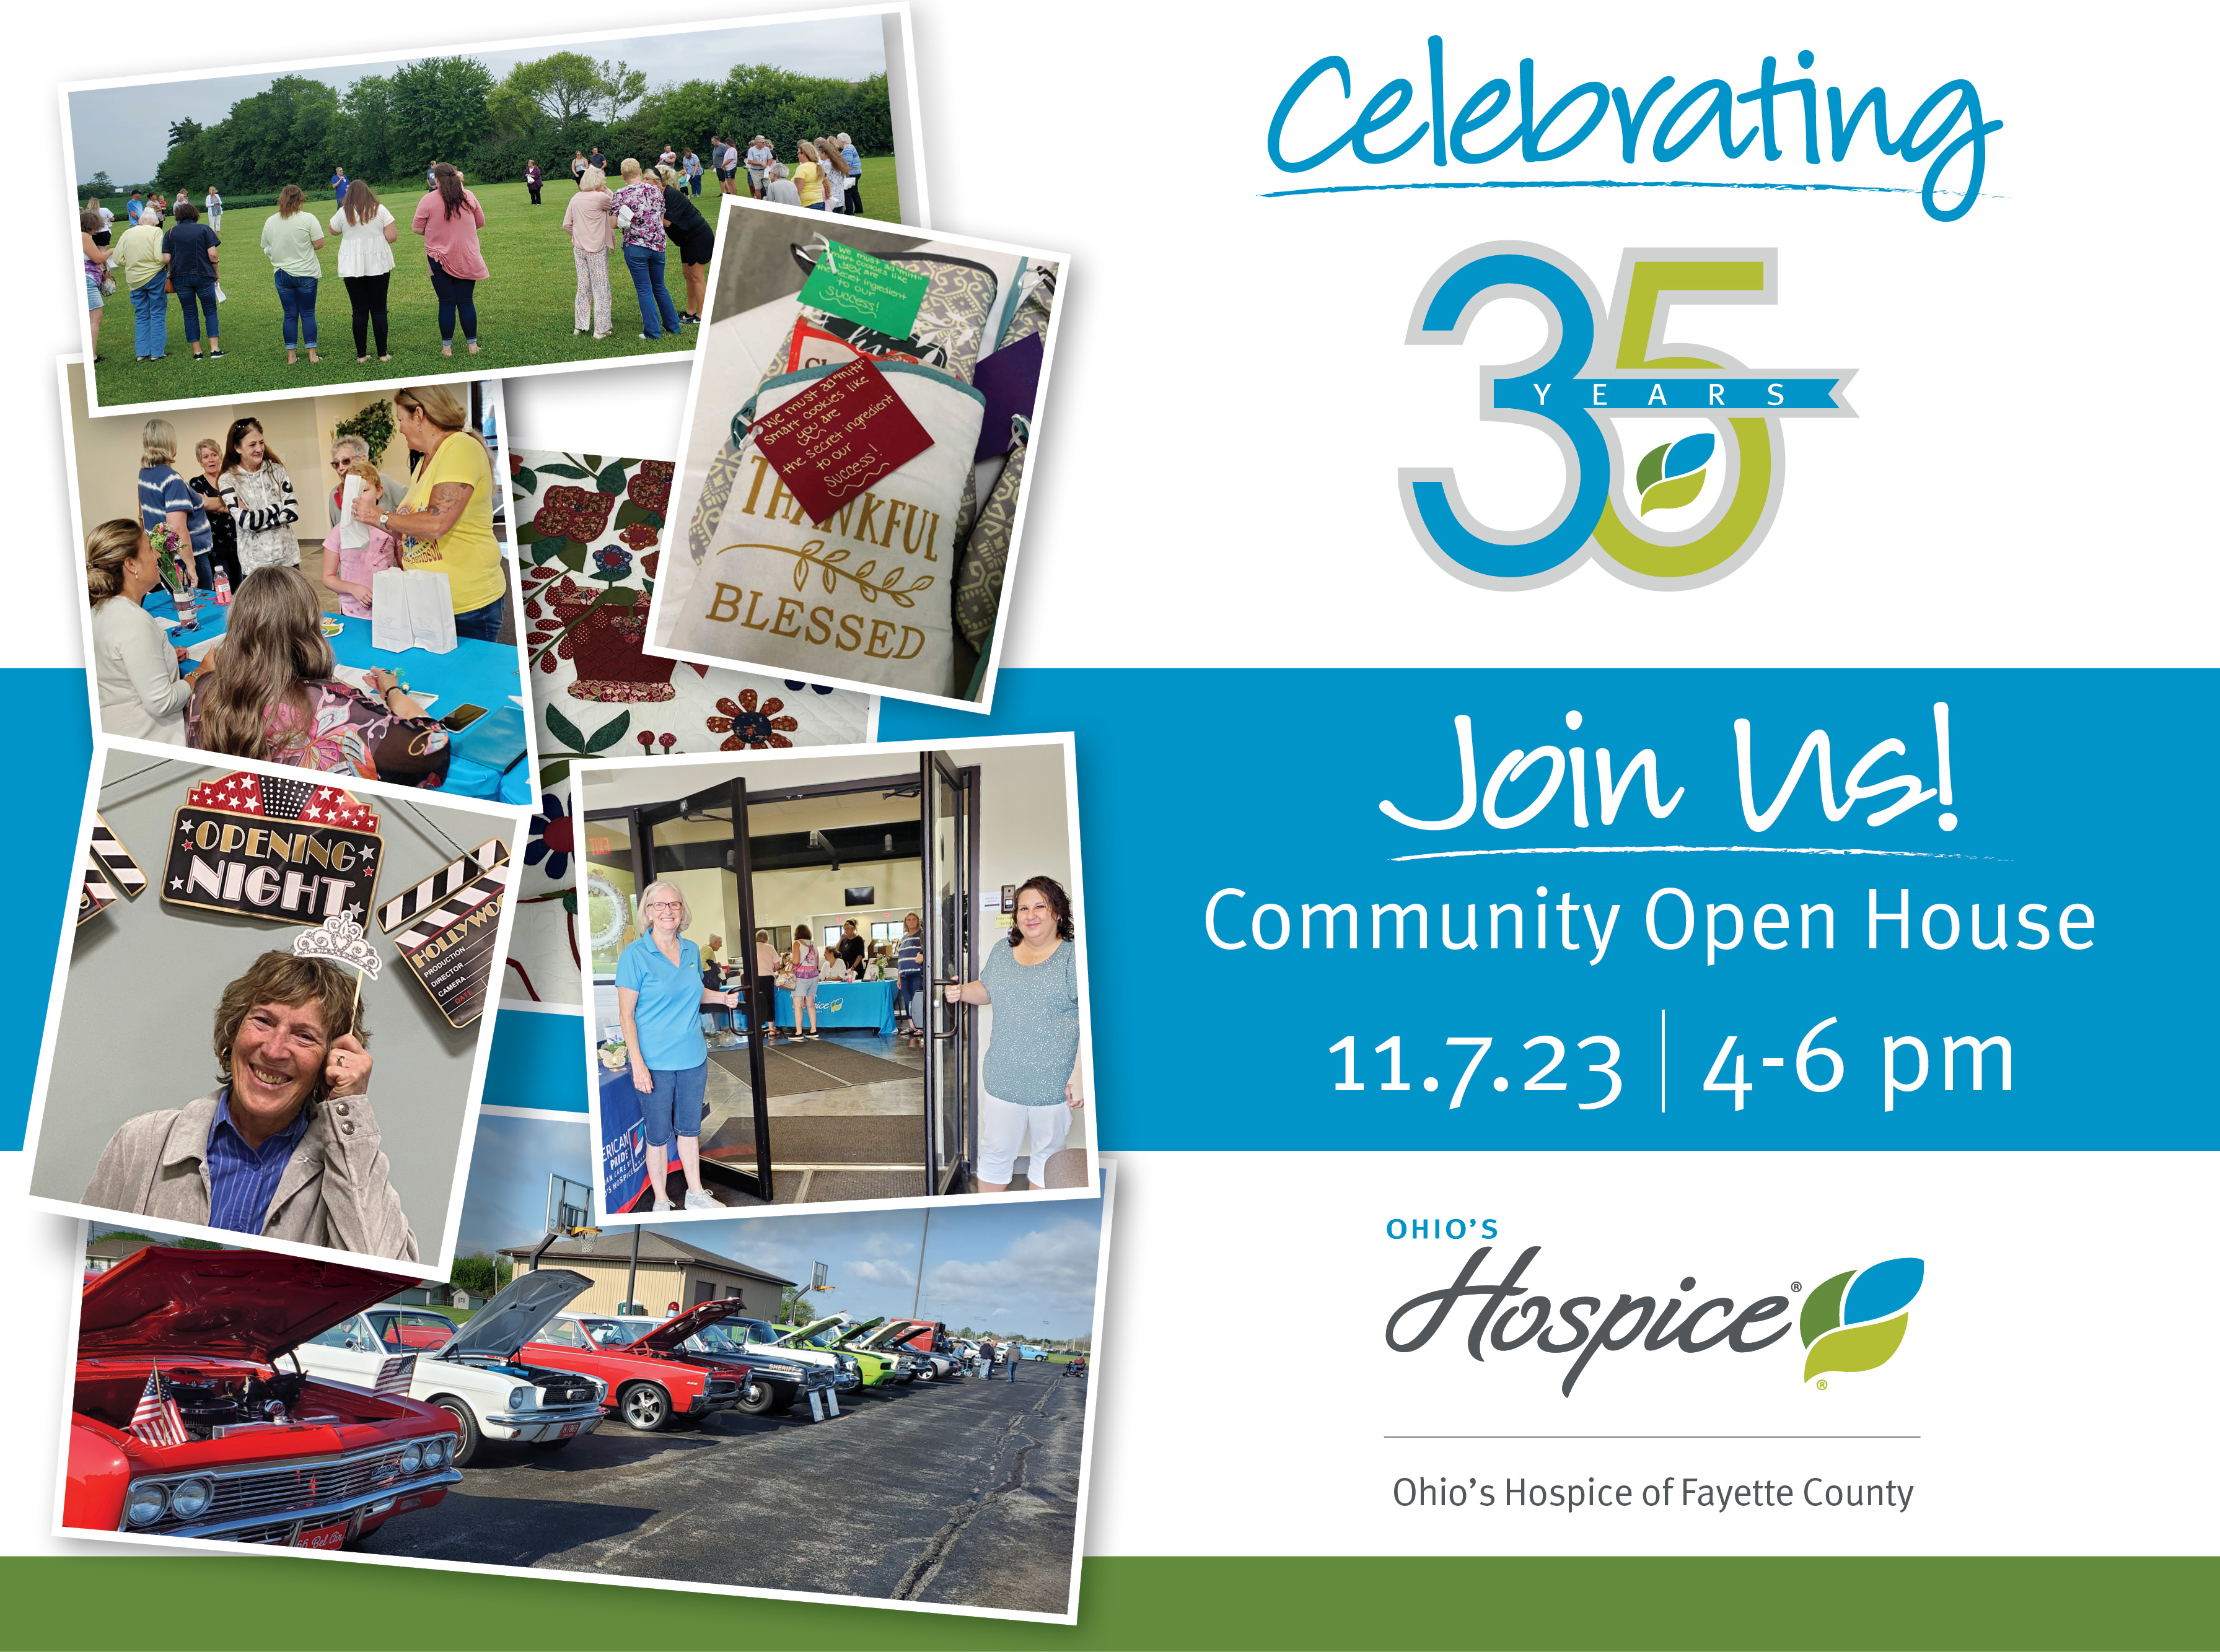 Celebrating 35 Years. Join Us! Community Open House. 11.7.23. 4-6 pm. Ohio's Hospice of Fayette County